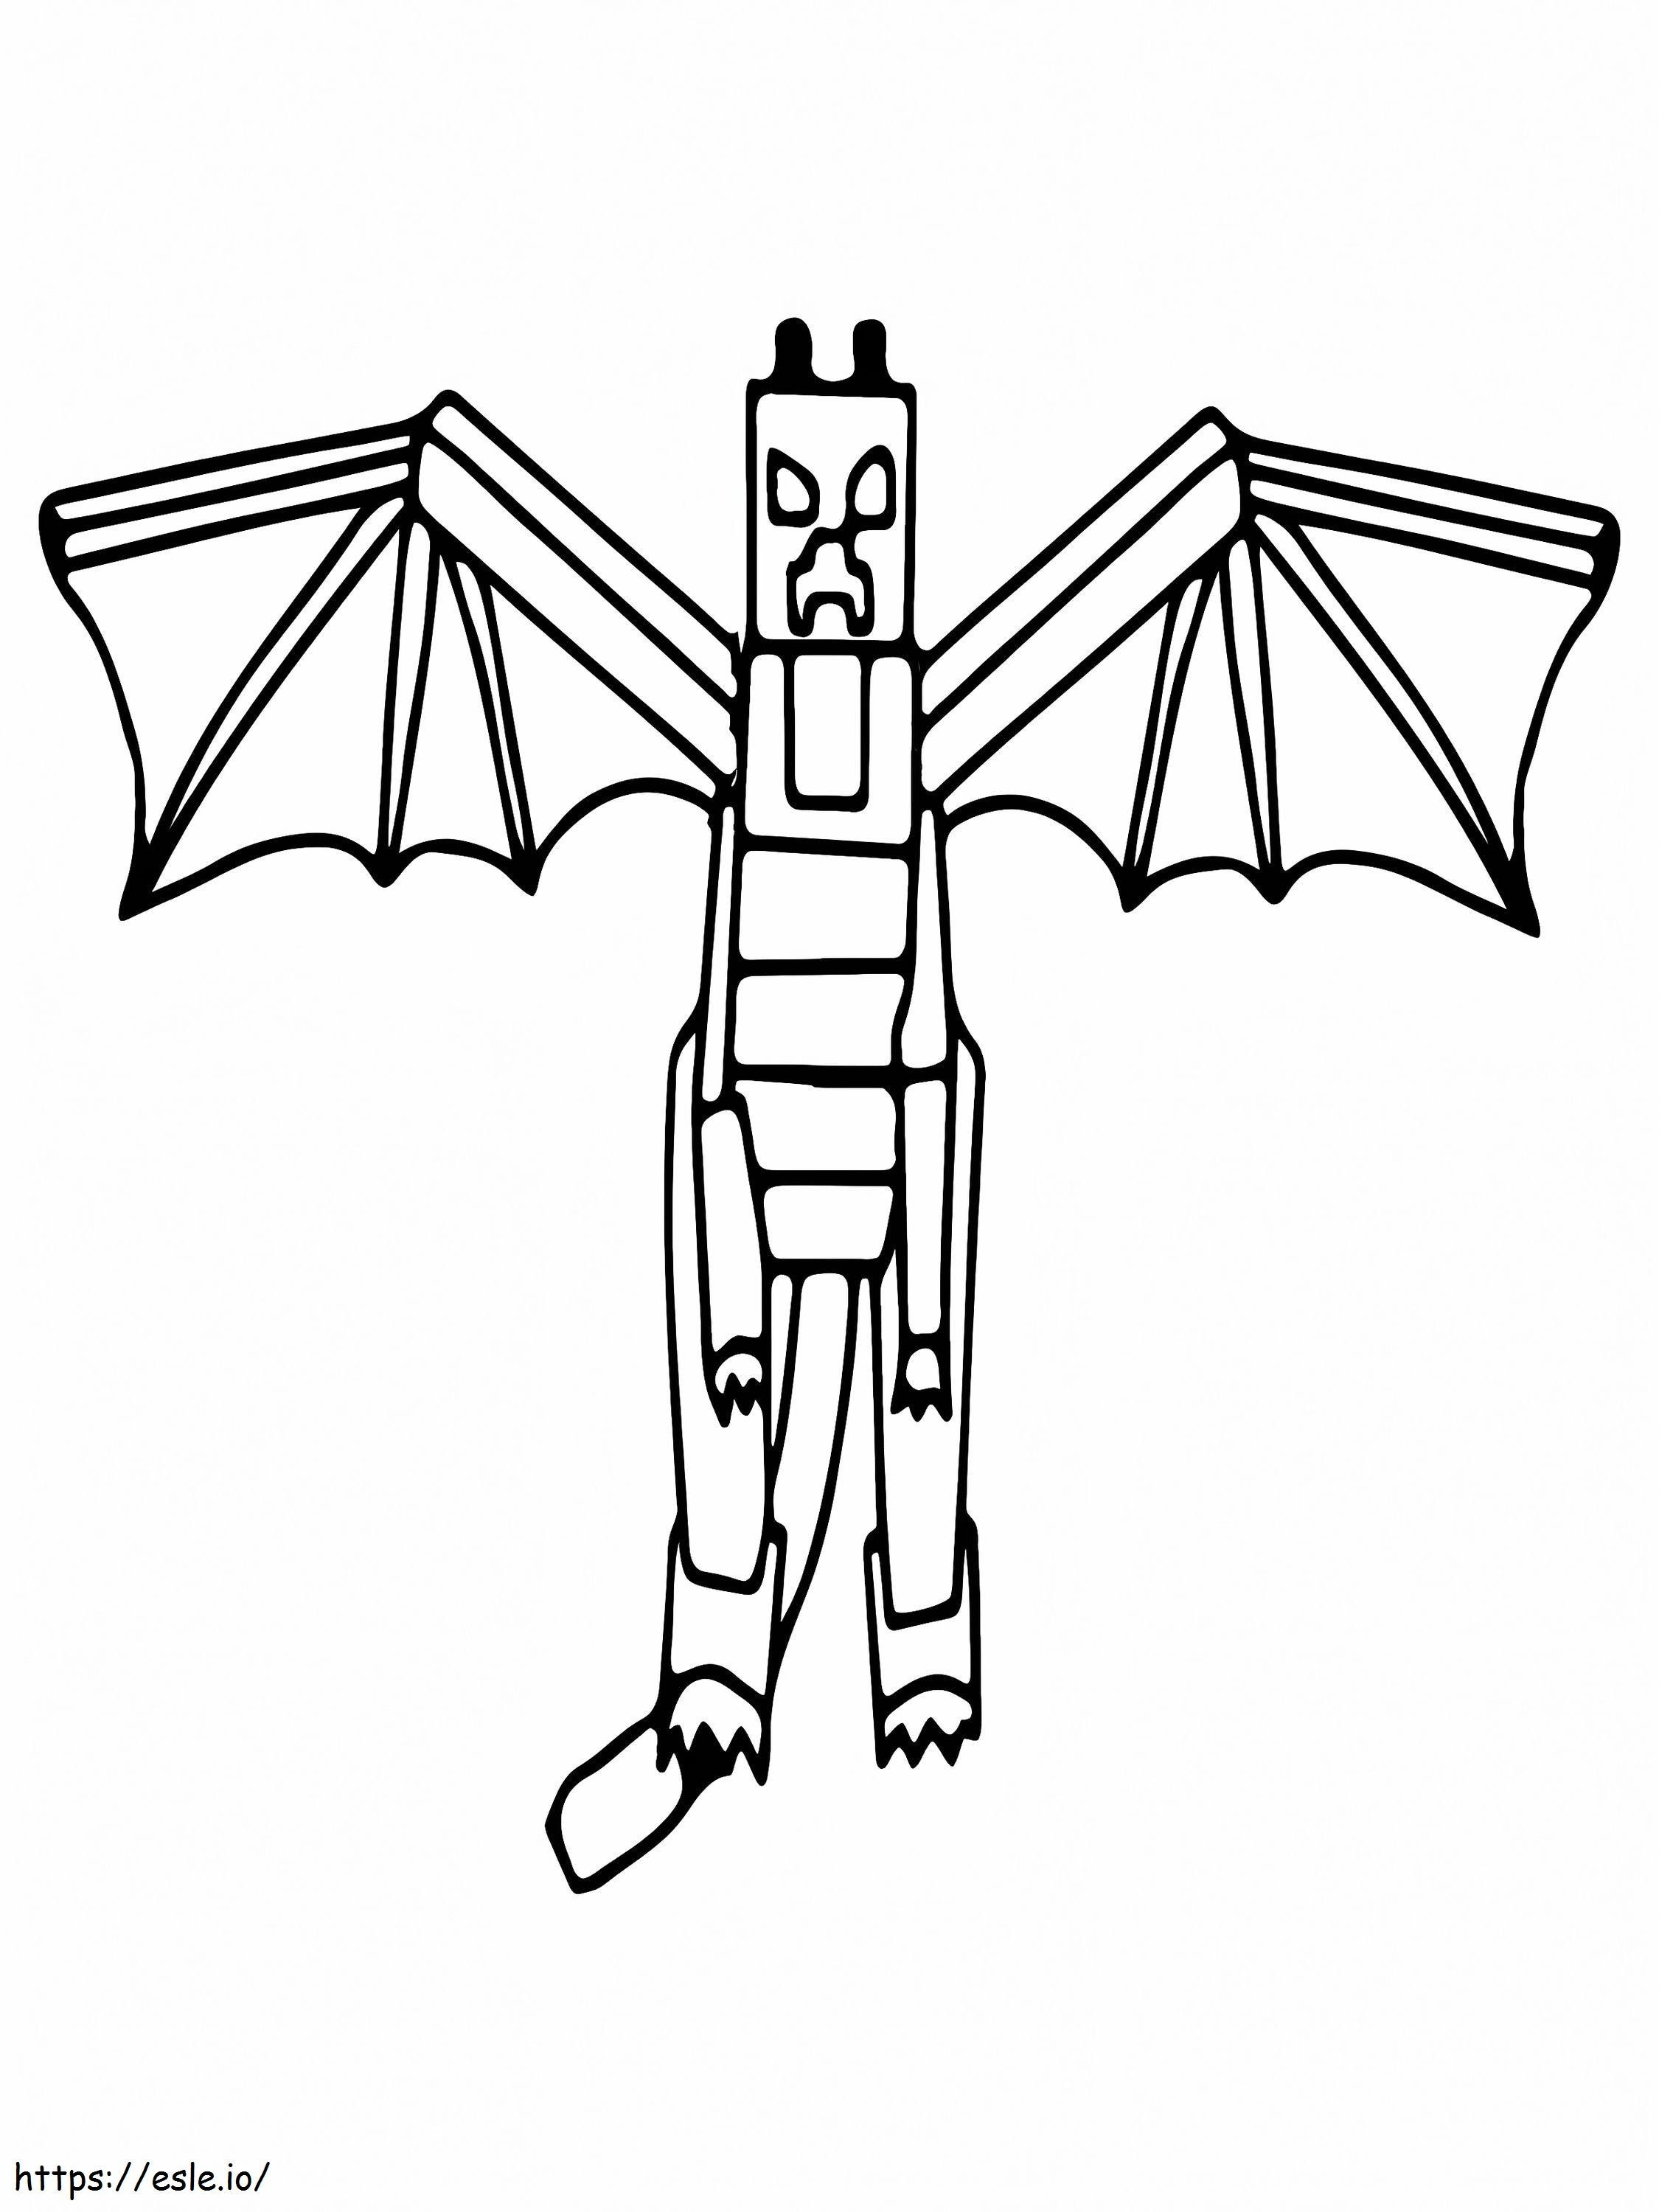 Minecraft Dragon Standing Straight coloring page